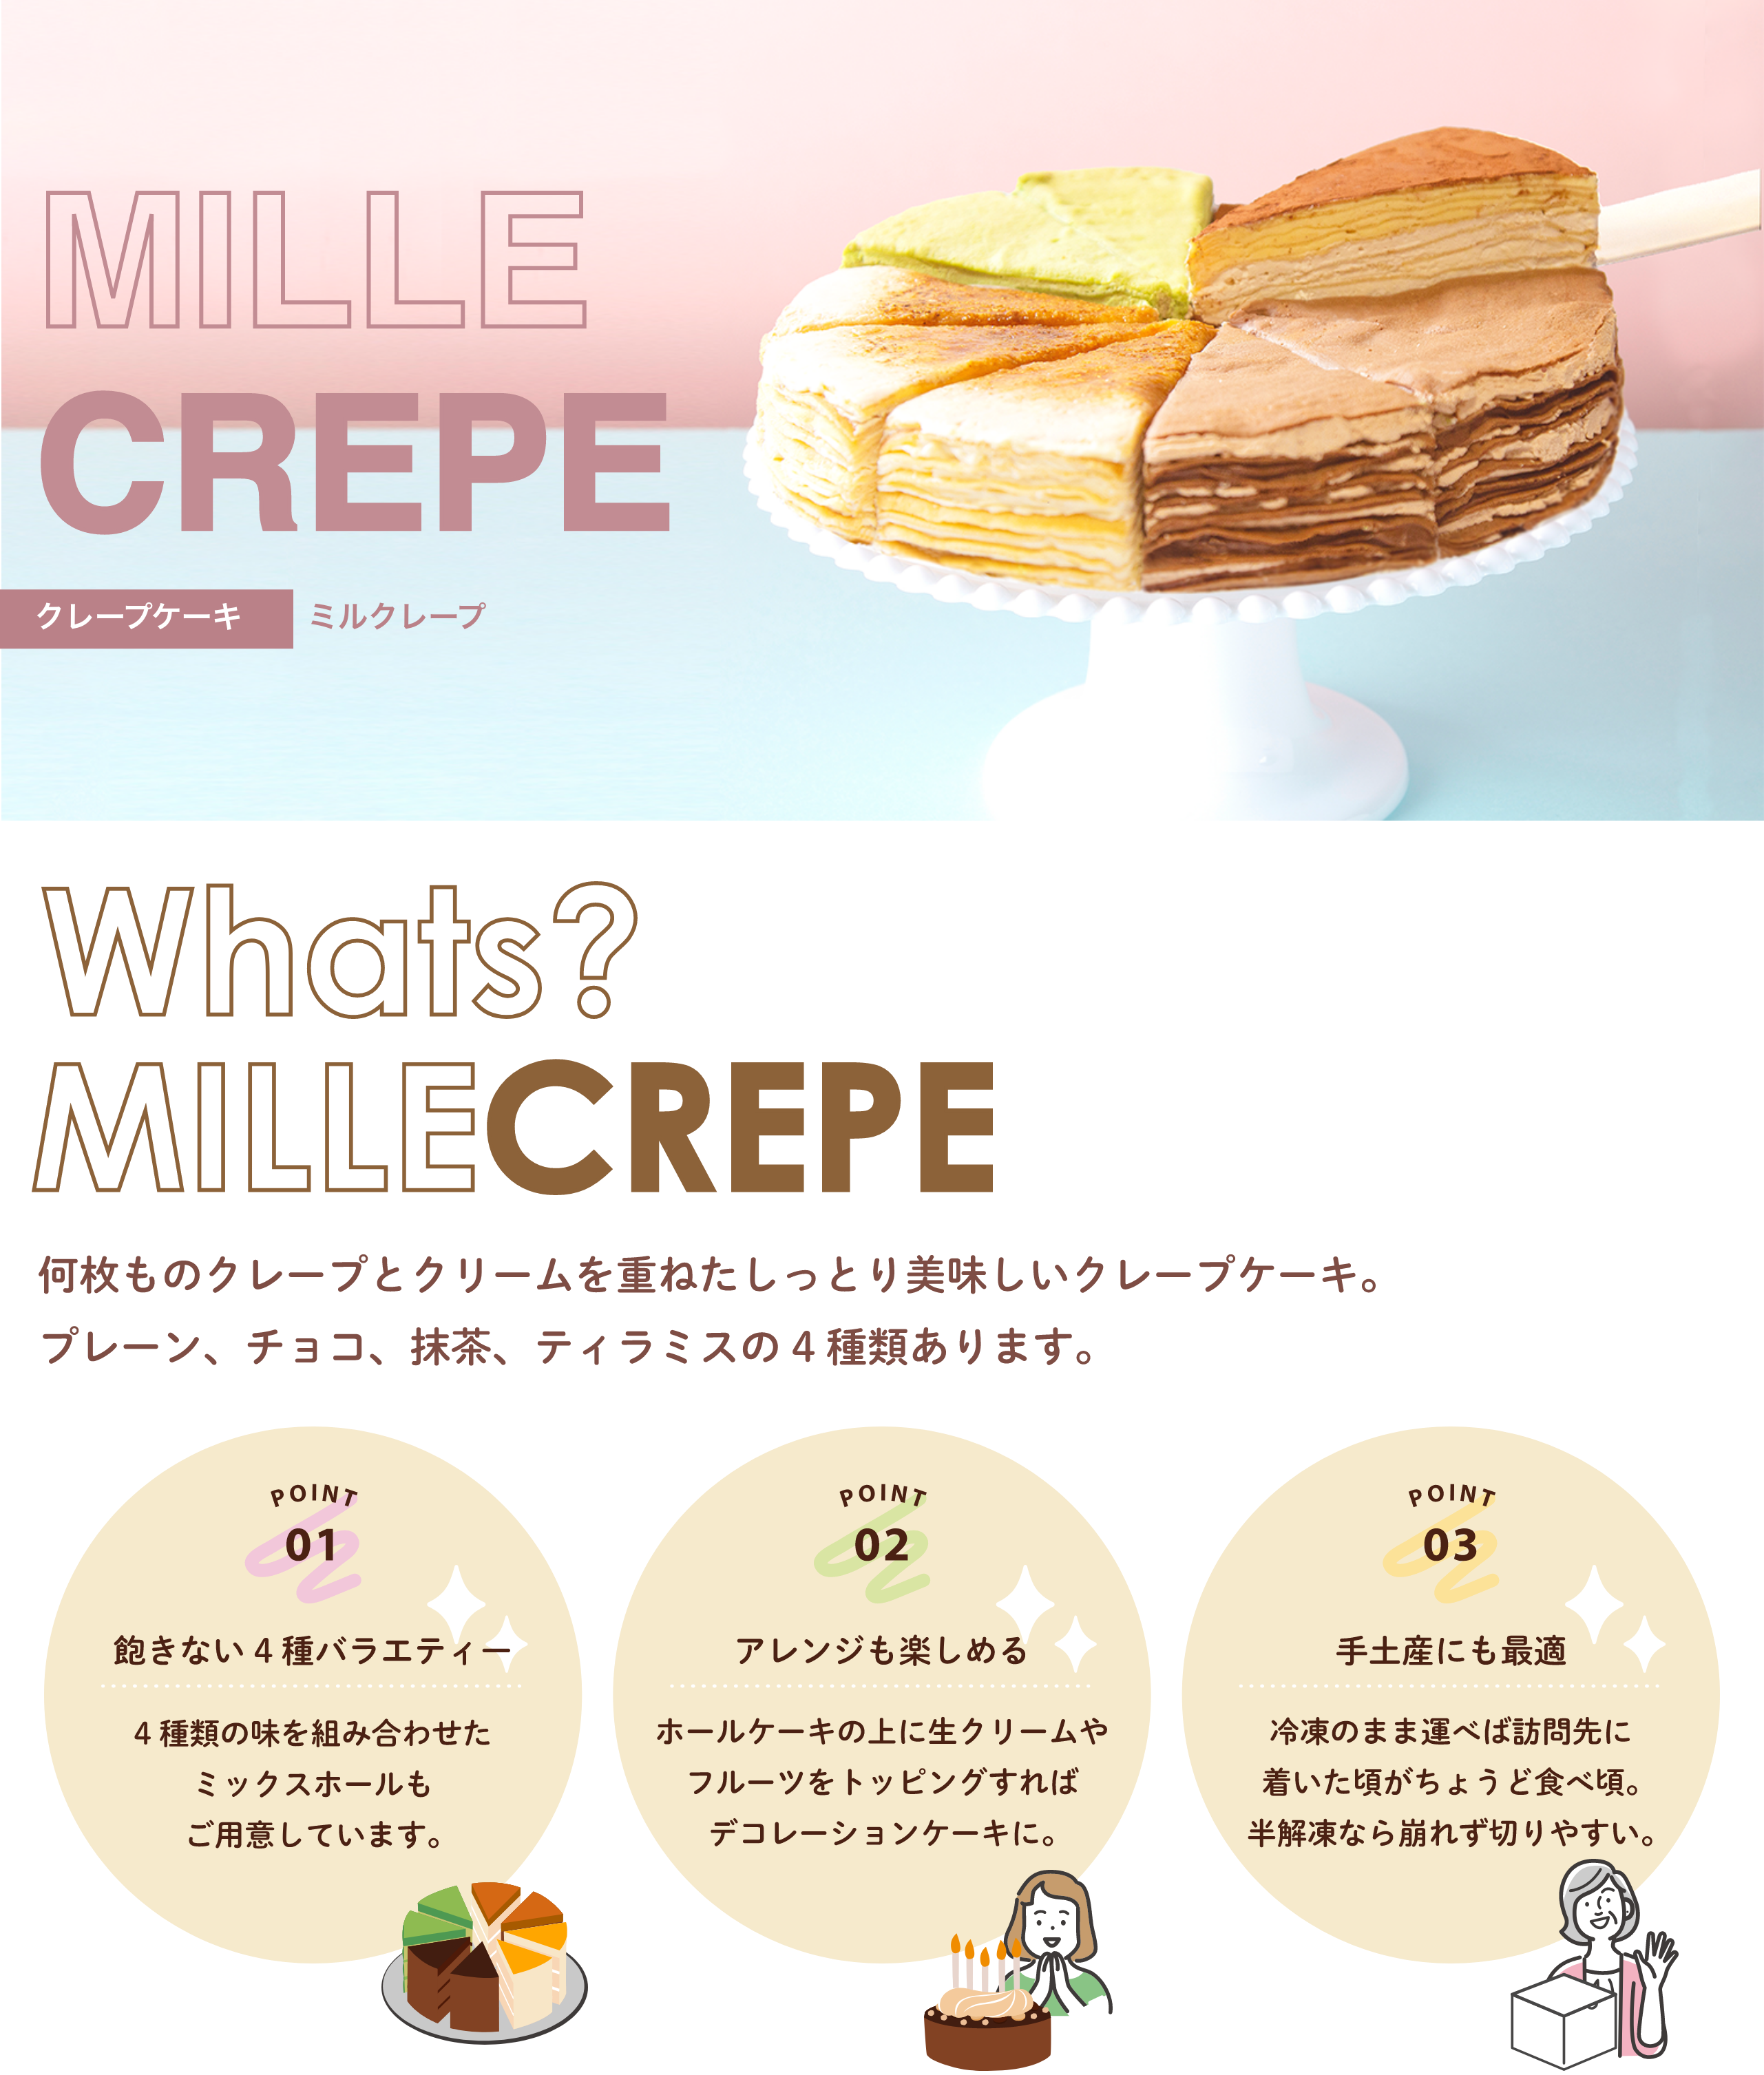 whats? mille crepe